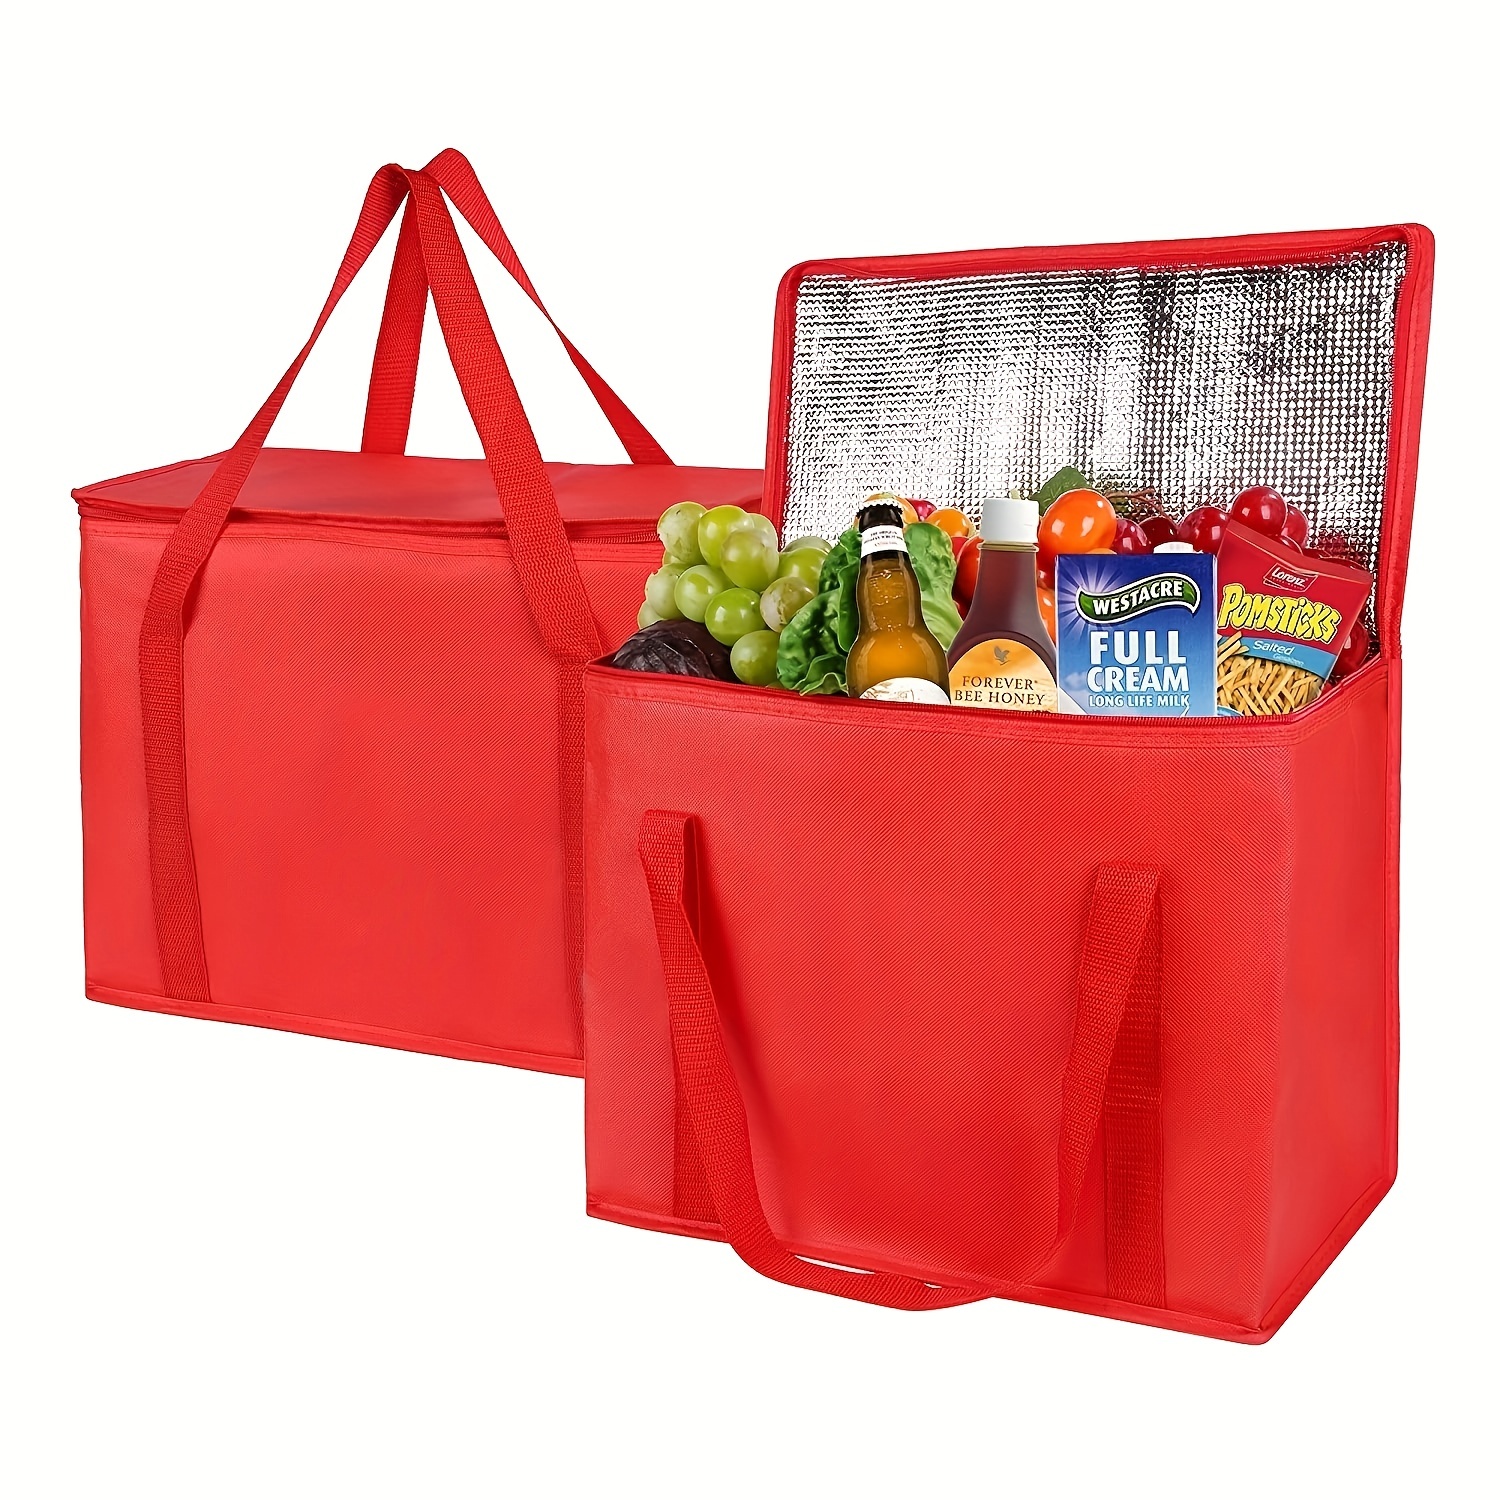 Reusable Shopping Bags for Groceries, 2 Pack XL Foldable Insulated Cooler  Bag with Strong Handle & Zipper for Food Delivery, Travel - Walmart.com